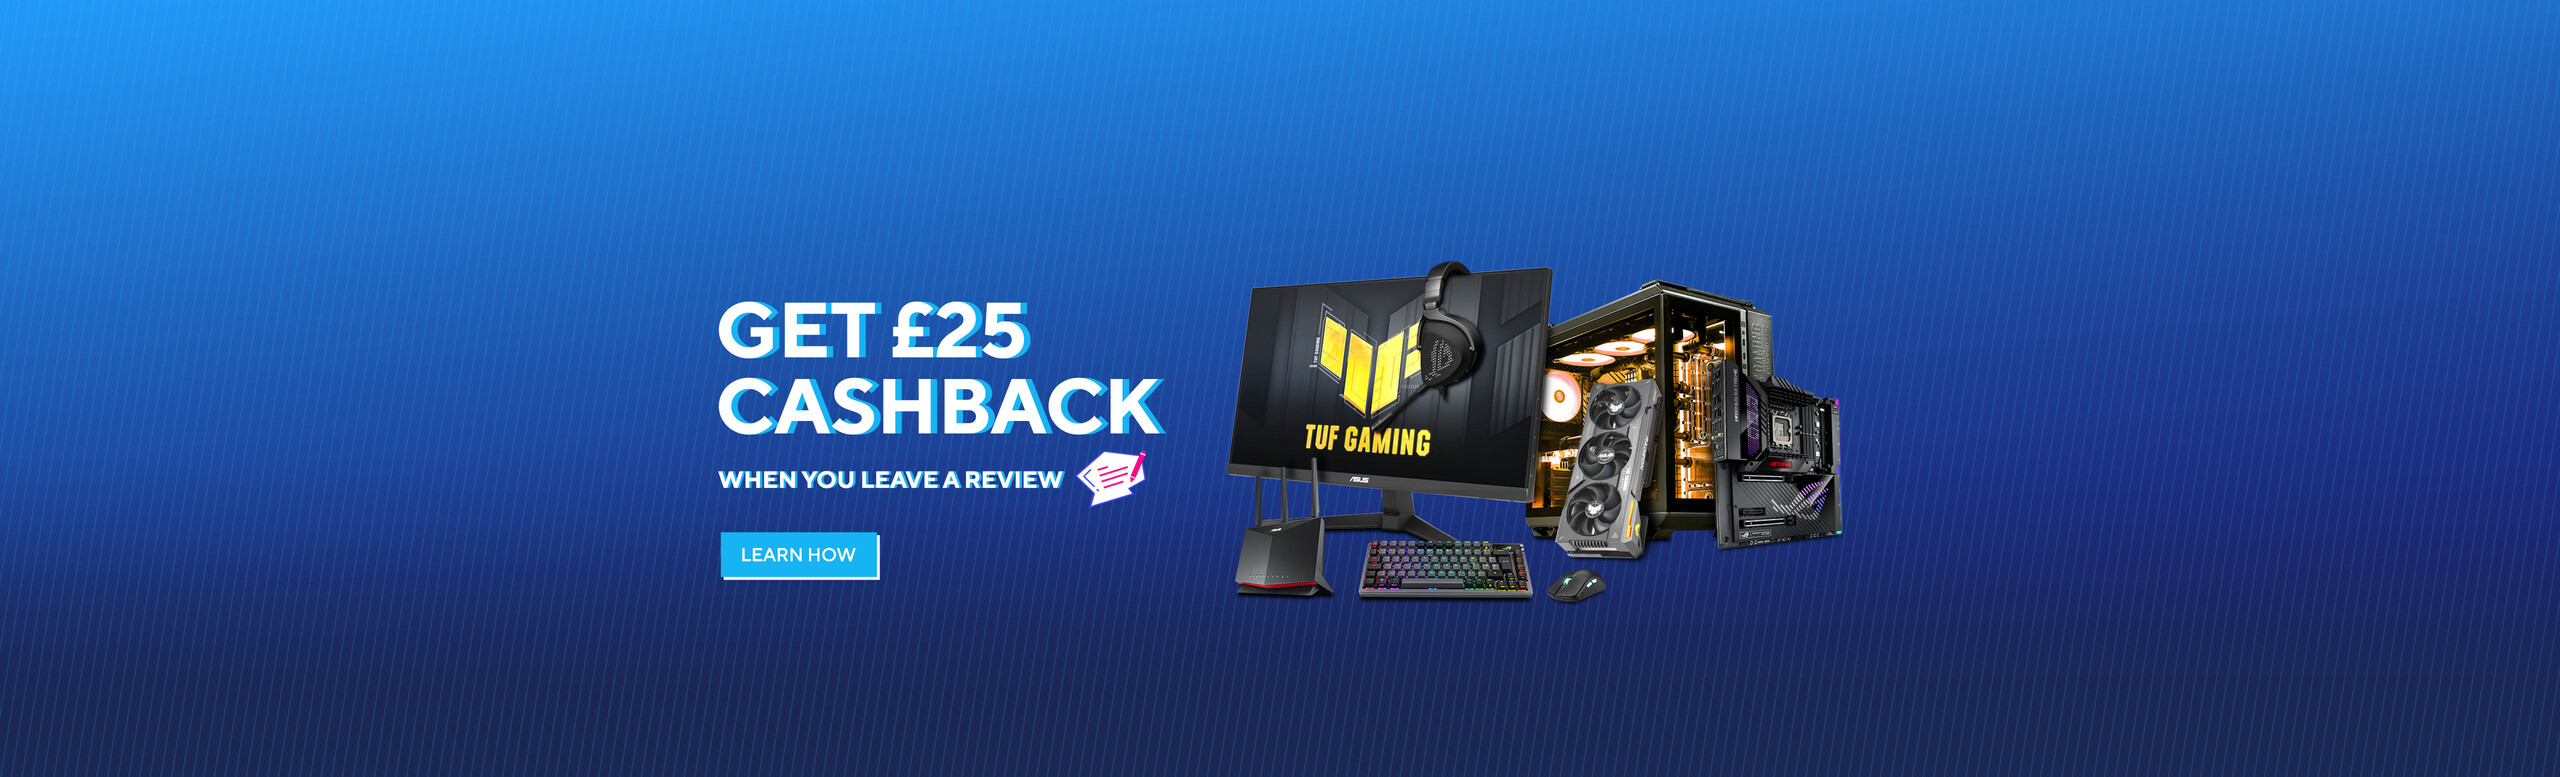 Get £25 cashback on selected Gaming Gear with Rate My Gear